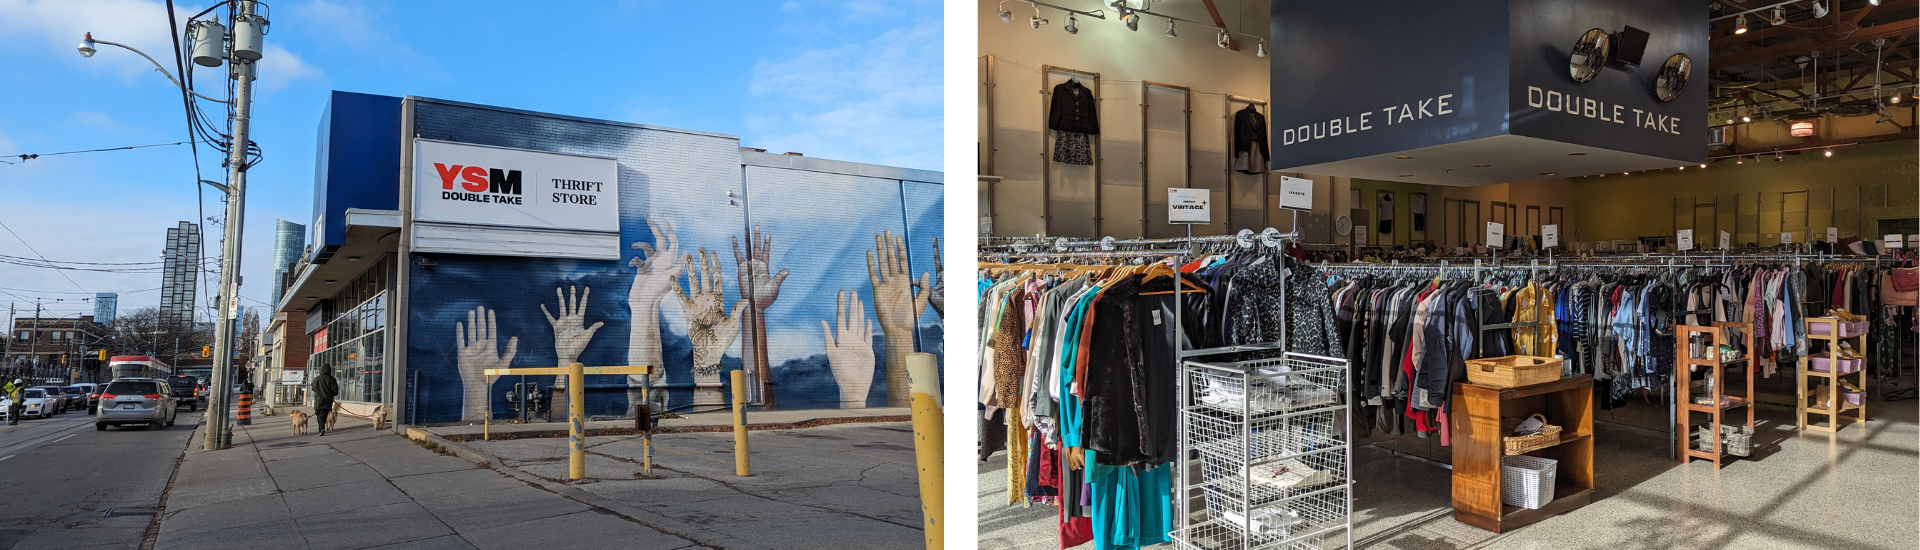 Exterior and Interior of the Yonge Street Mission's Double Take Thrift Store